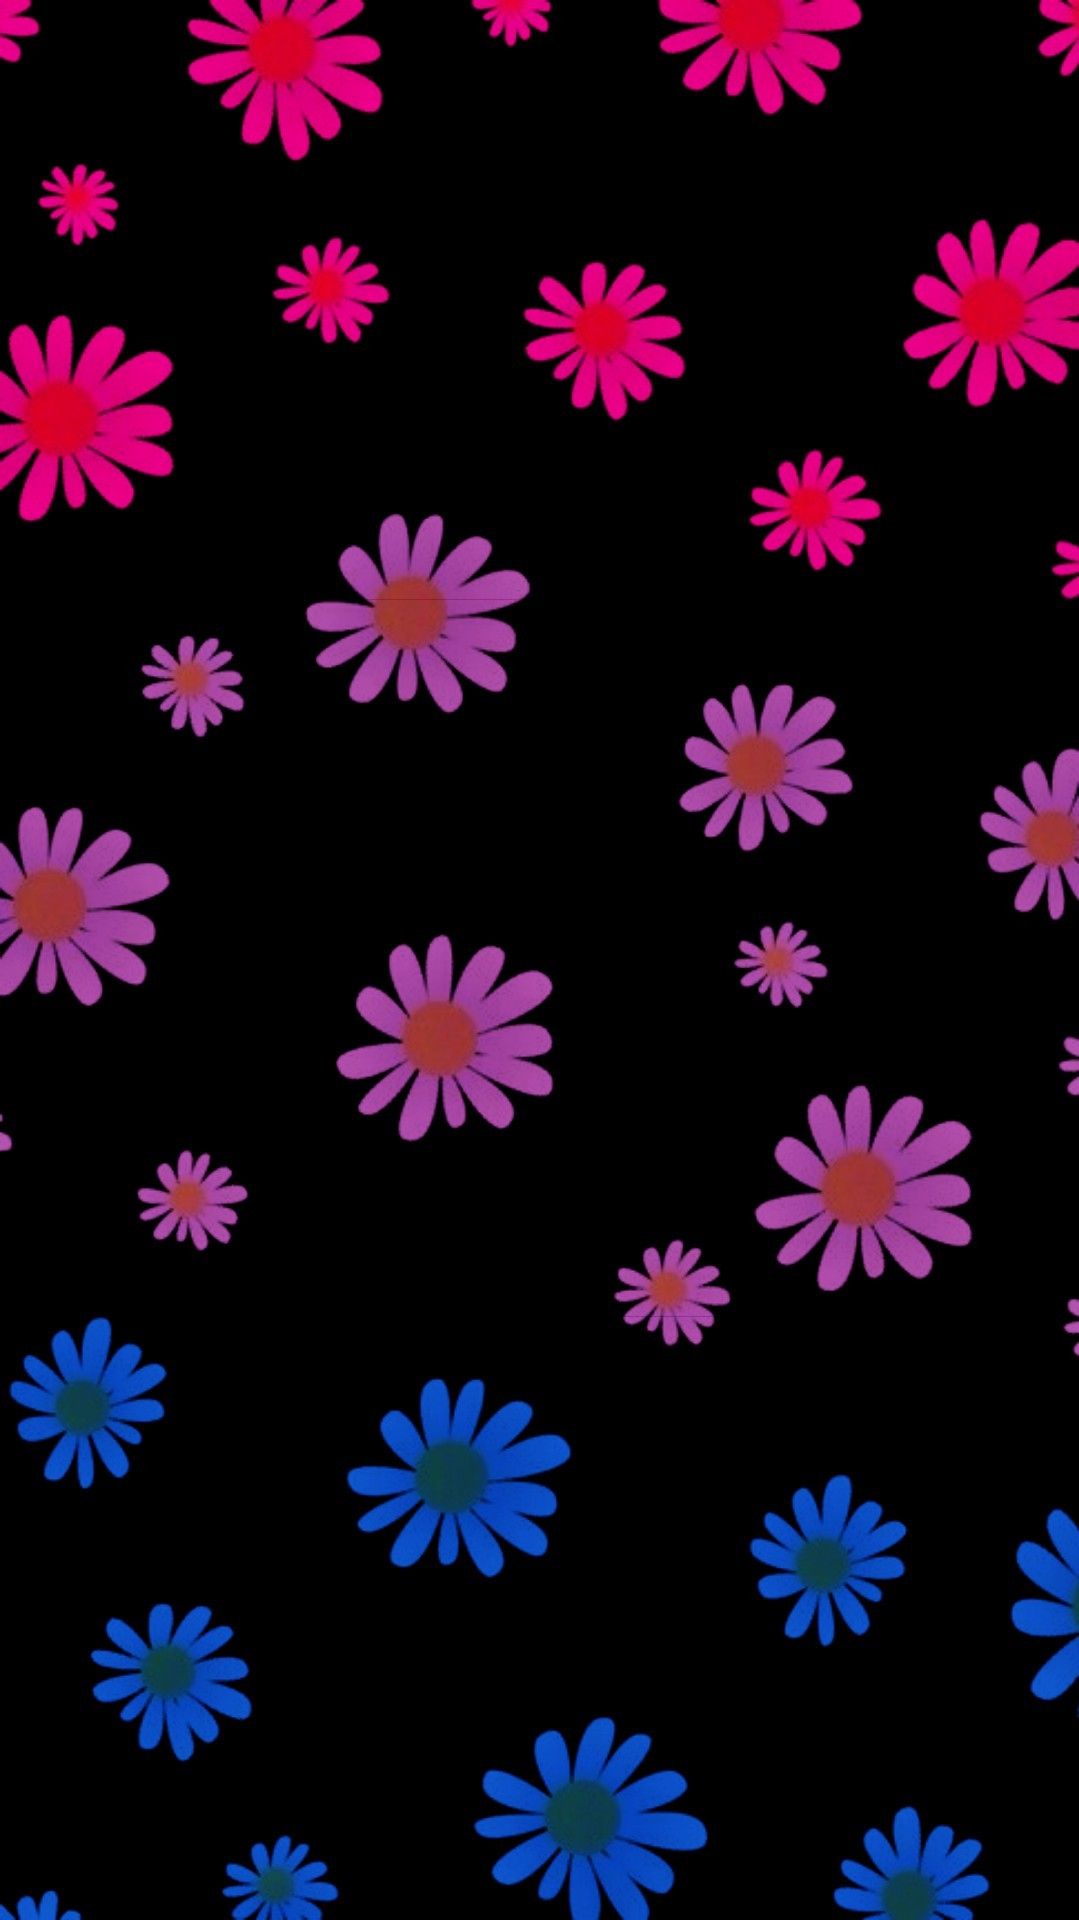 Aesthetic wallpaper for phone with flowers. - Bisexual